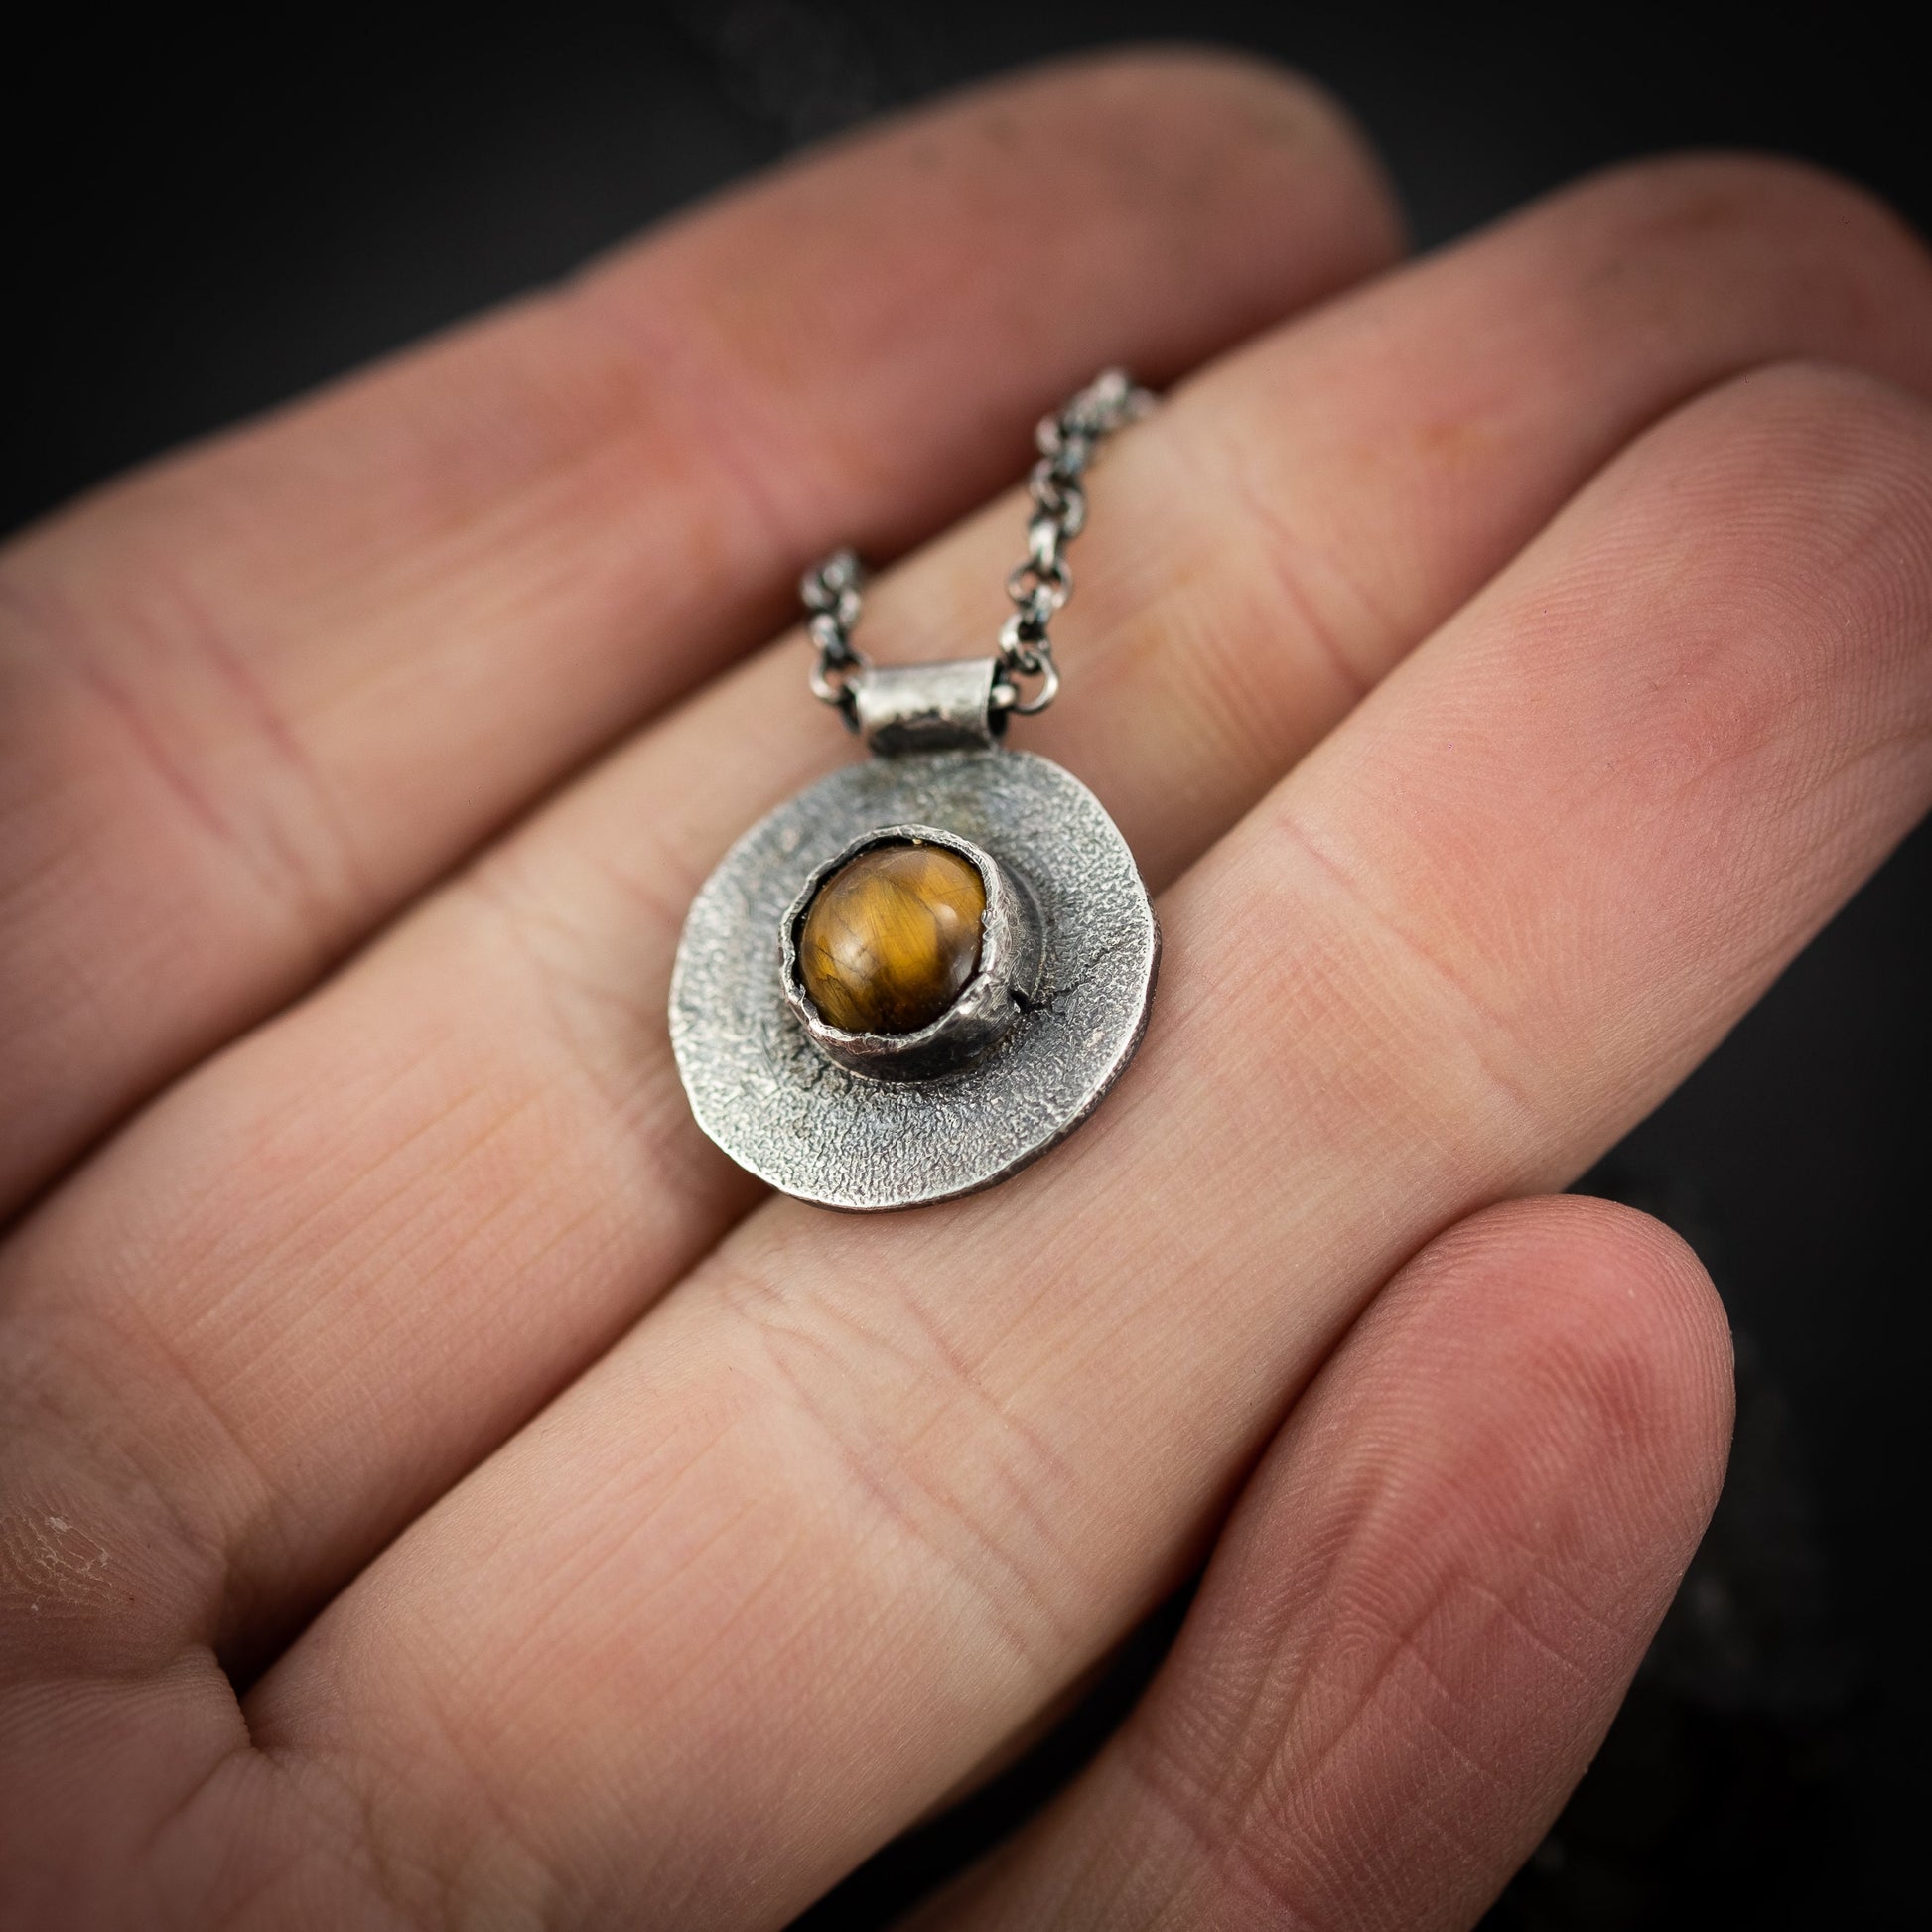 Rustic Silver Necklace with Tiger's eye Gemstone, Gift for her, Crystal pendant, Handmade silver jewelry, Unique girlfriend gift